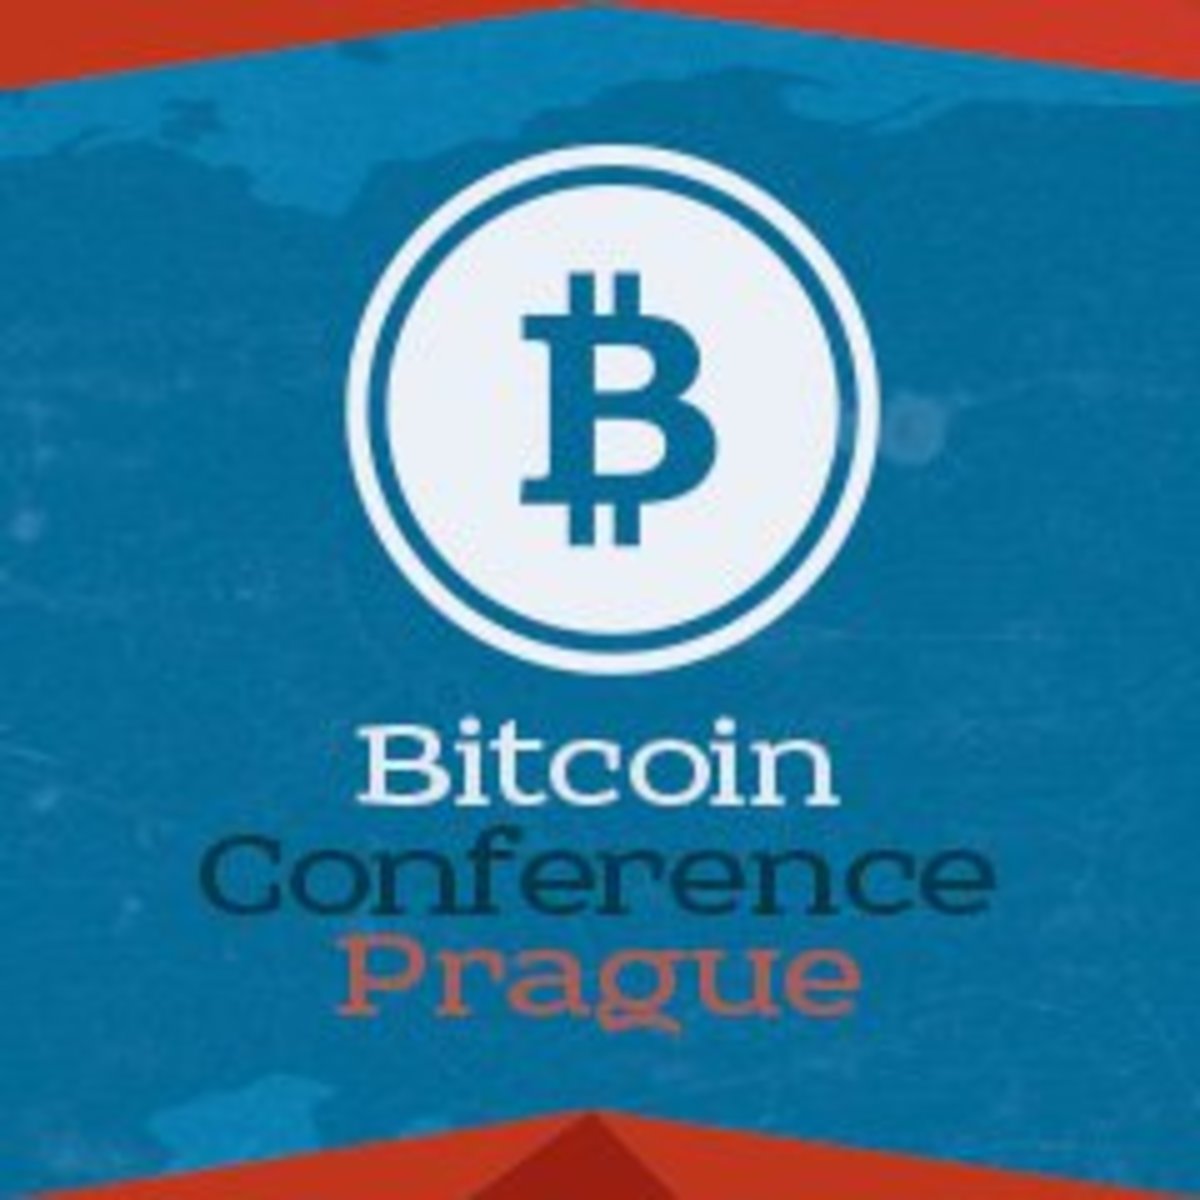 Op-ed - Bitcoin Conference Prague Planned for May 2015